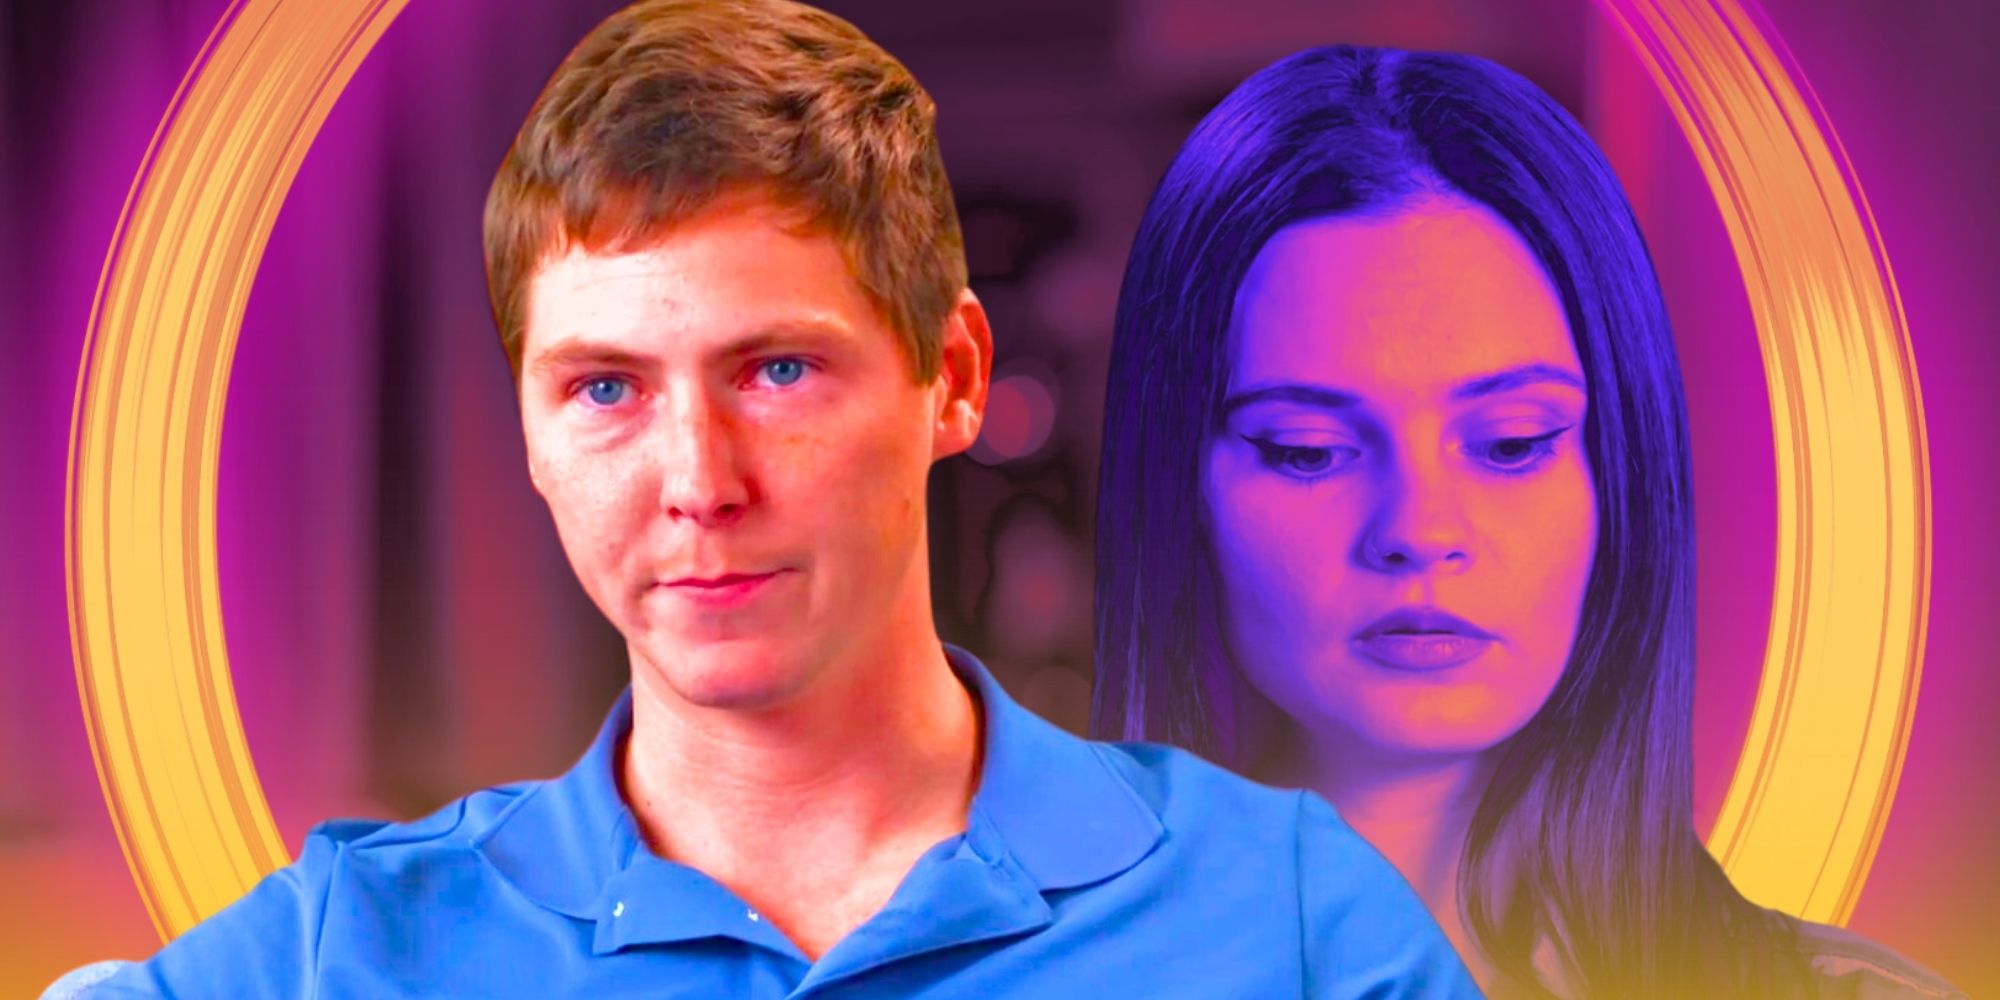 90 Day Fiancé Brandon Gibbs in blue shirt looking angry and Julia Trubkina with disappointed look in the background